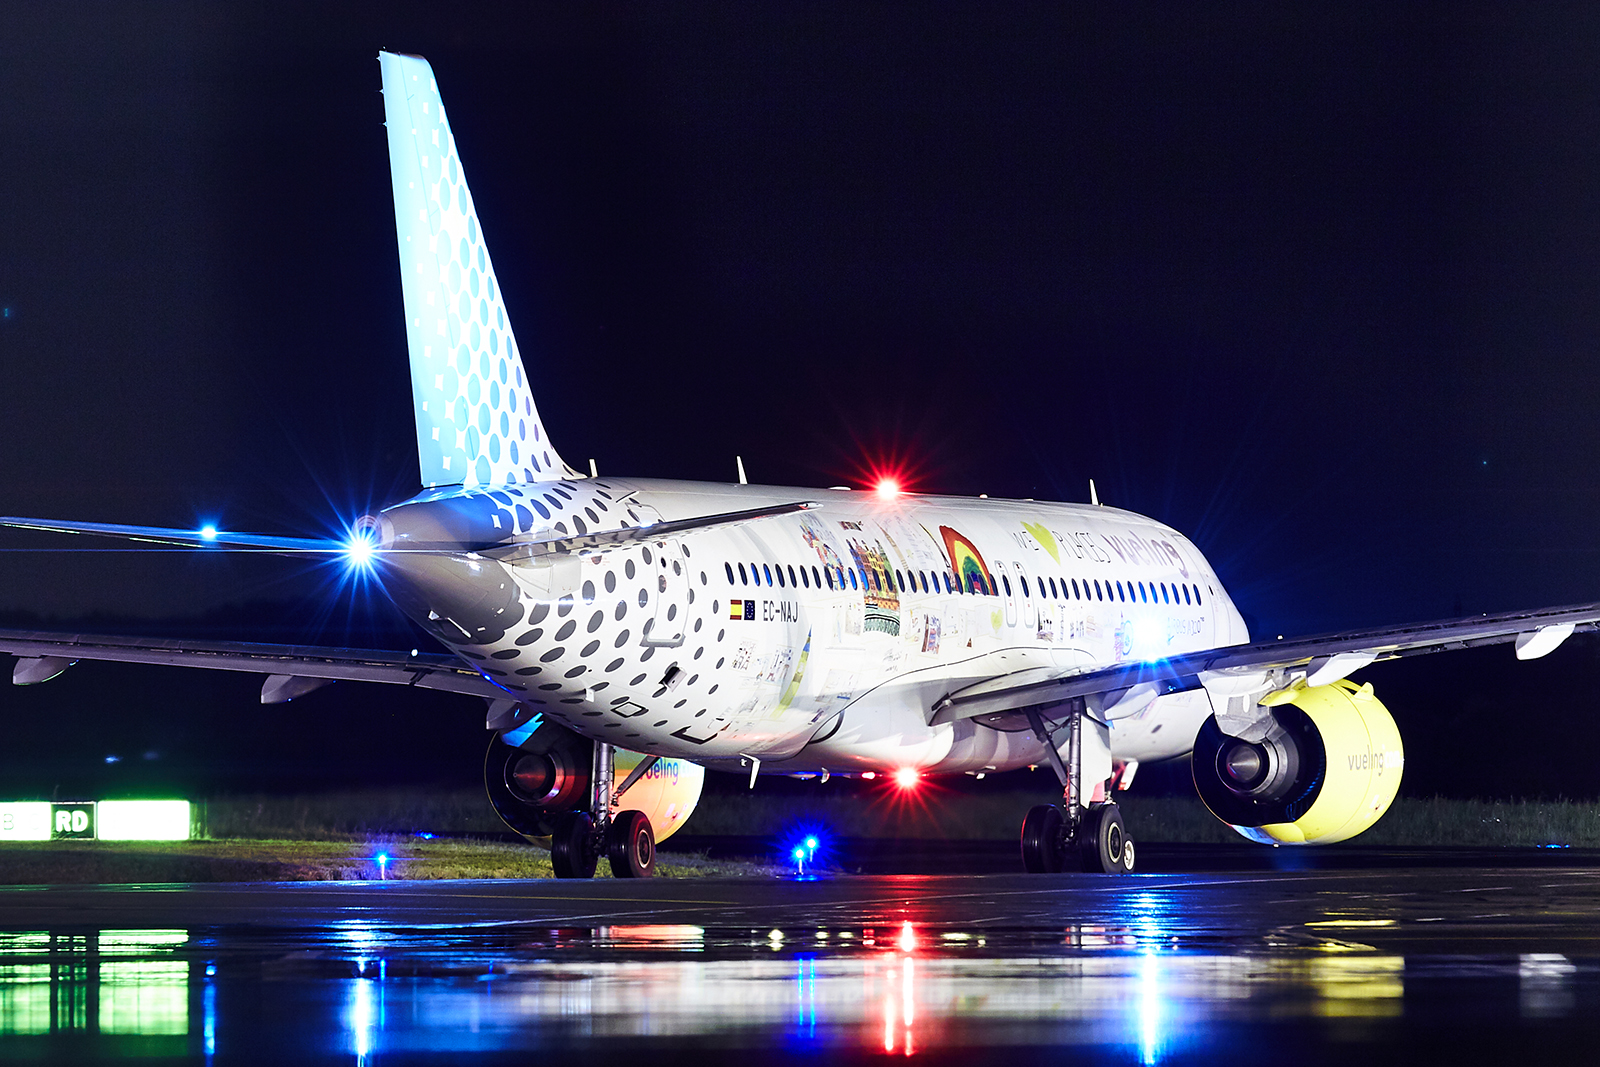 [25/04/2019] A320neo (EC-NAJ) Vueling "We love places" livery 1904261132275493216213142